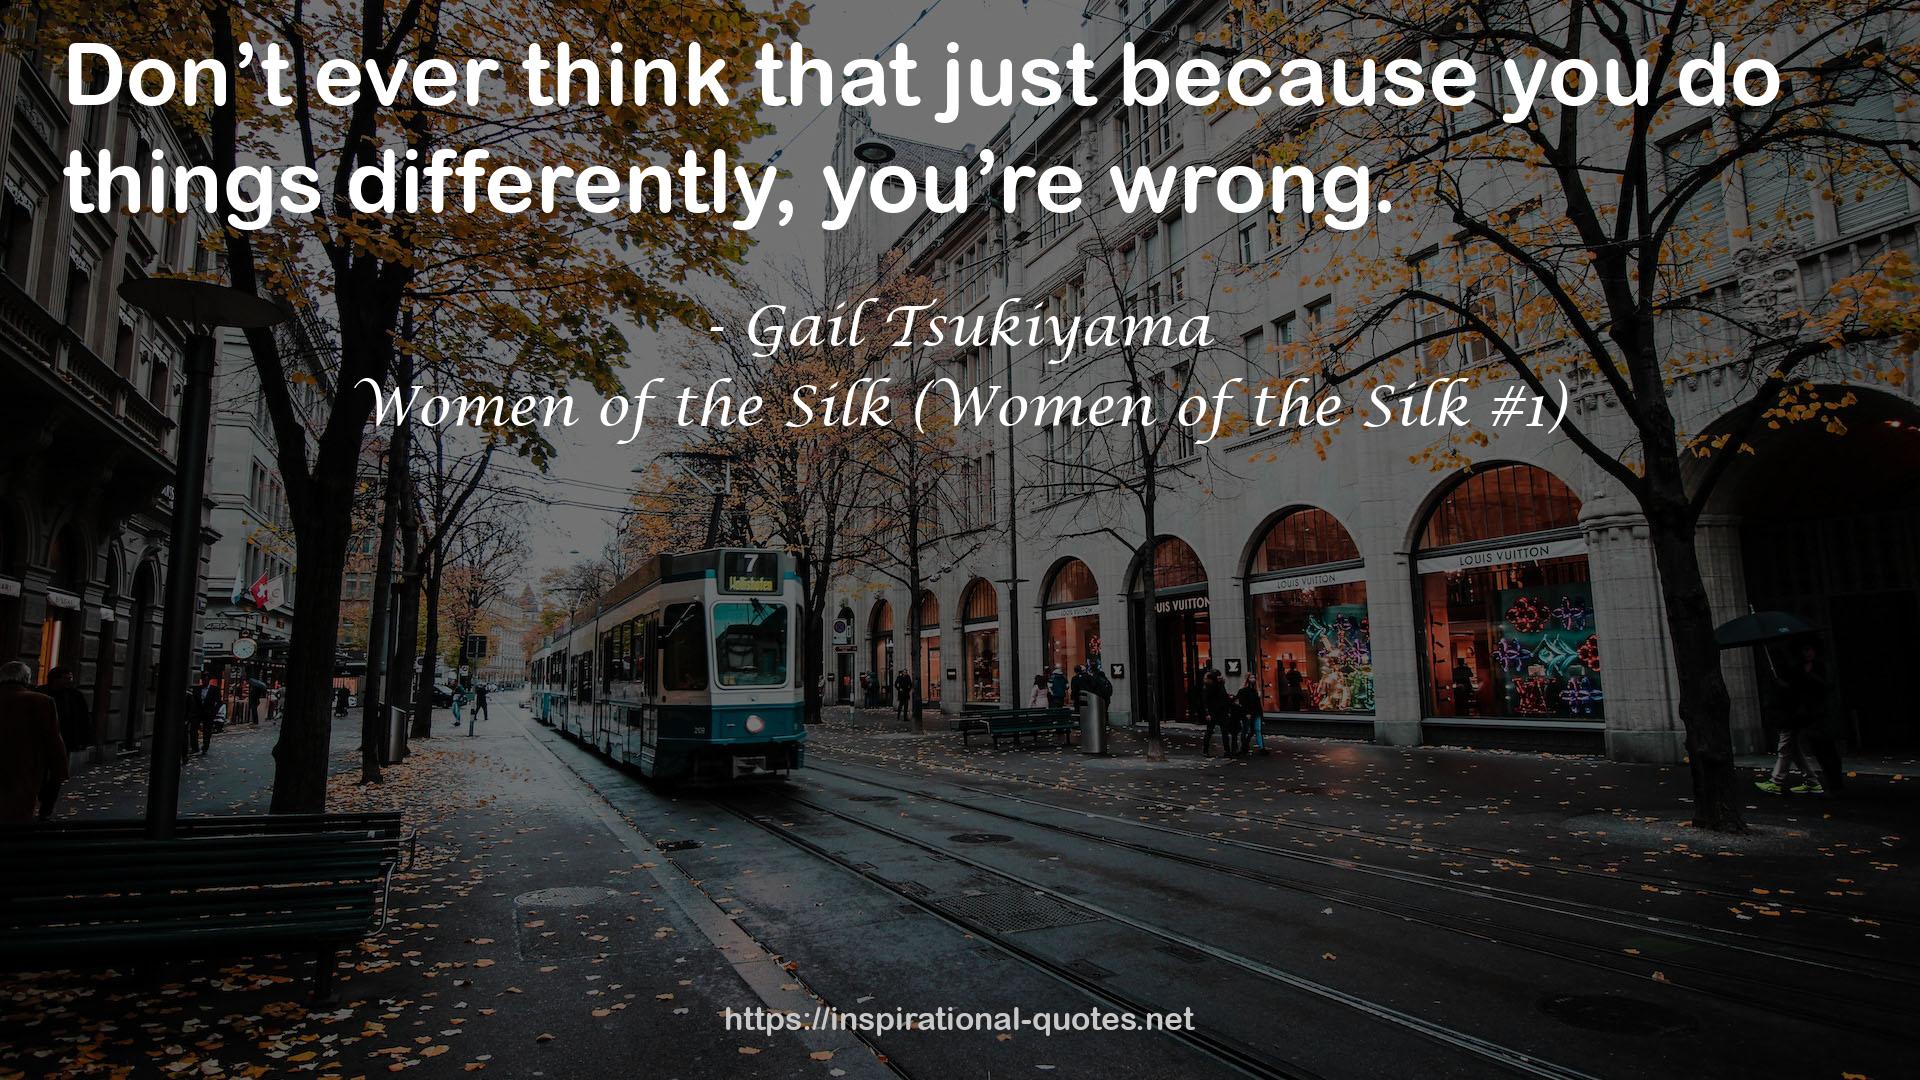 Women of the Silk (Women of the Silk #1) QUOTES